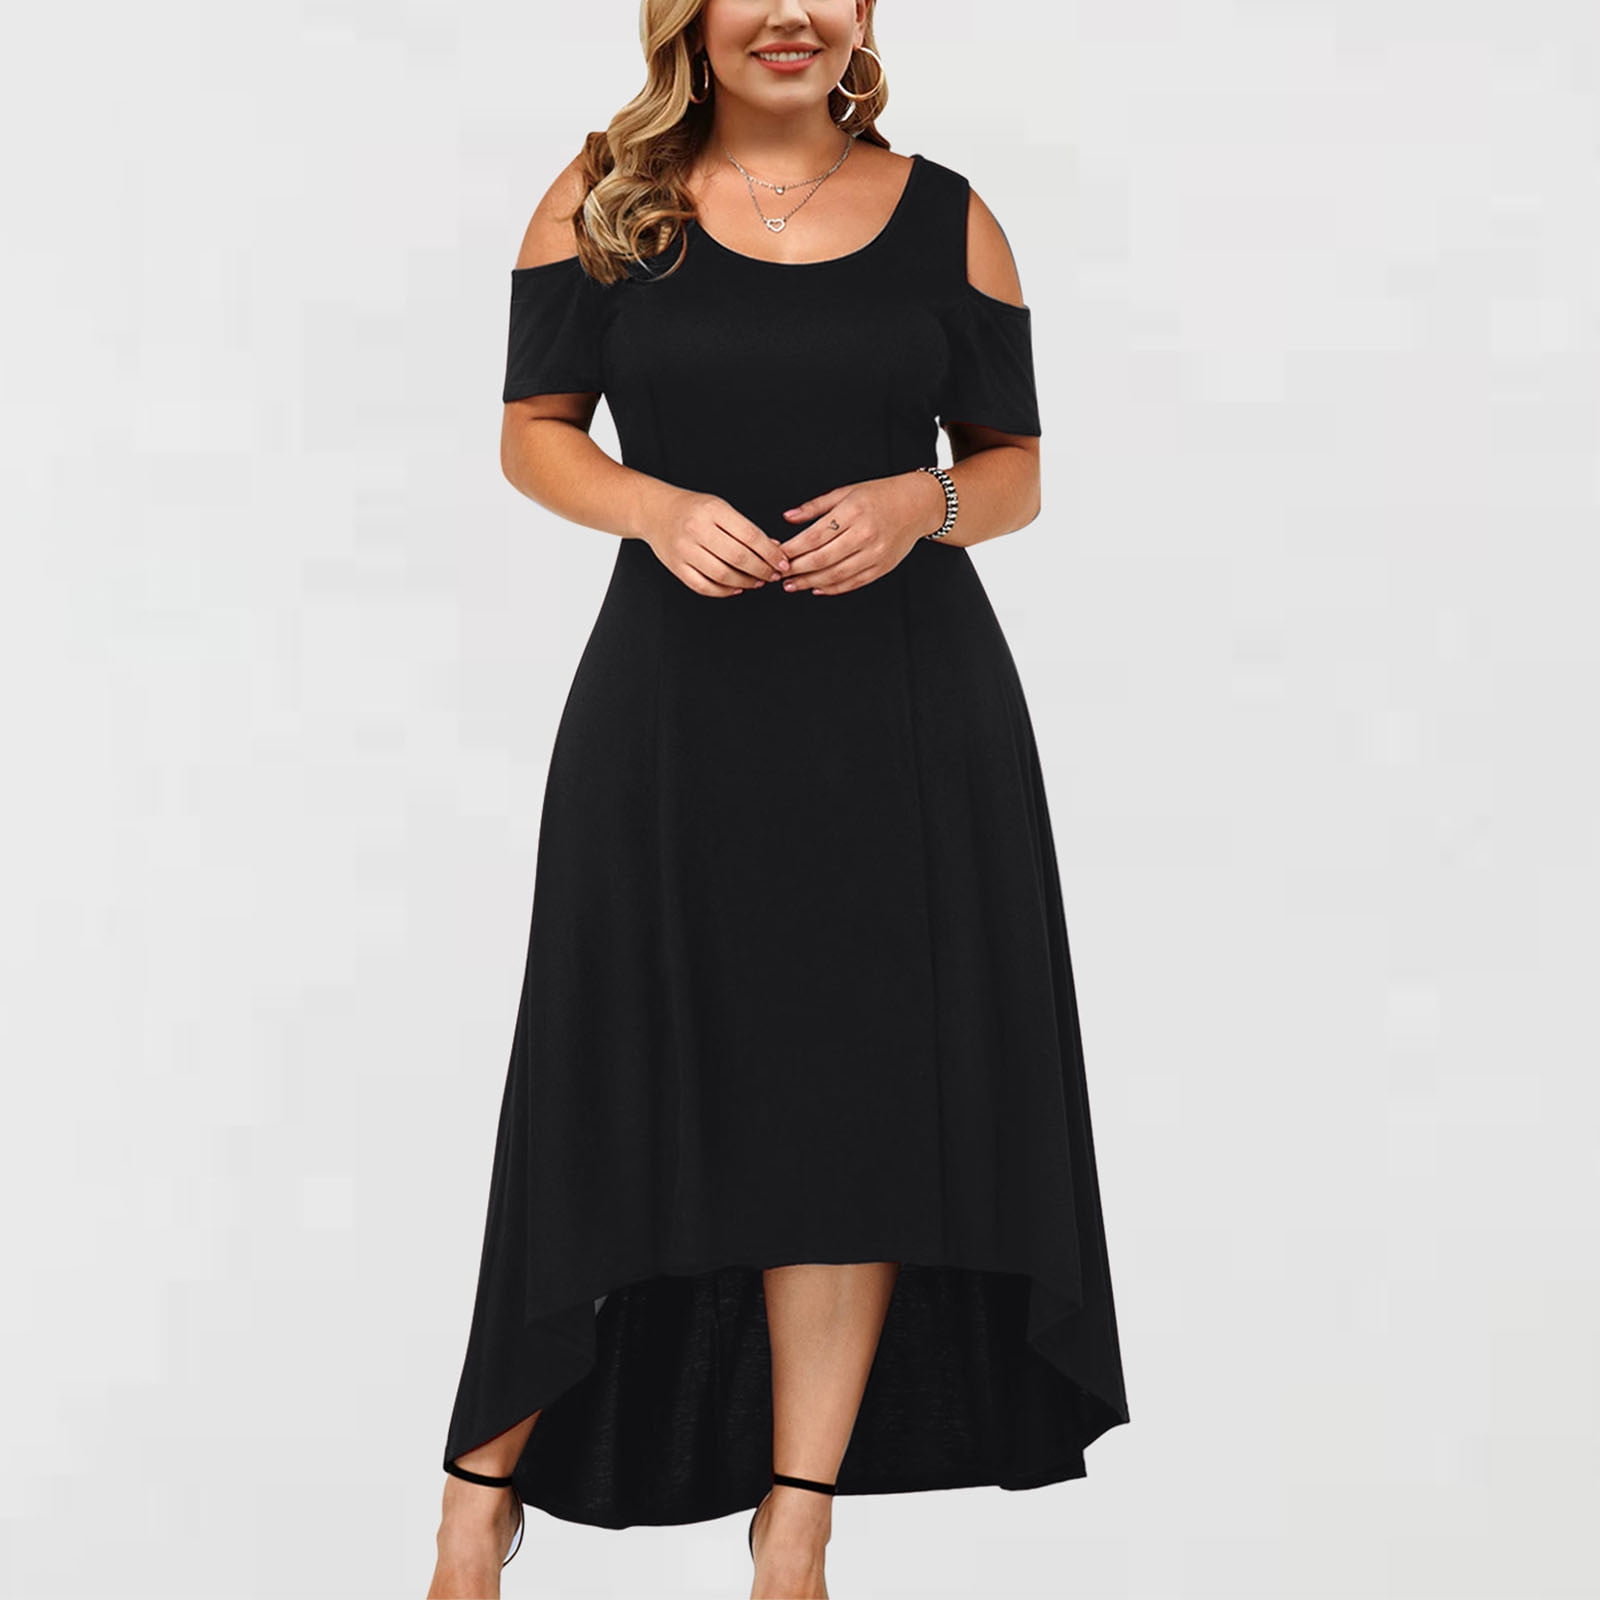 CHGBMOK Clearance Plus Size Wedding Guest Dresses for